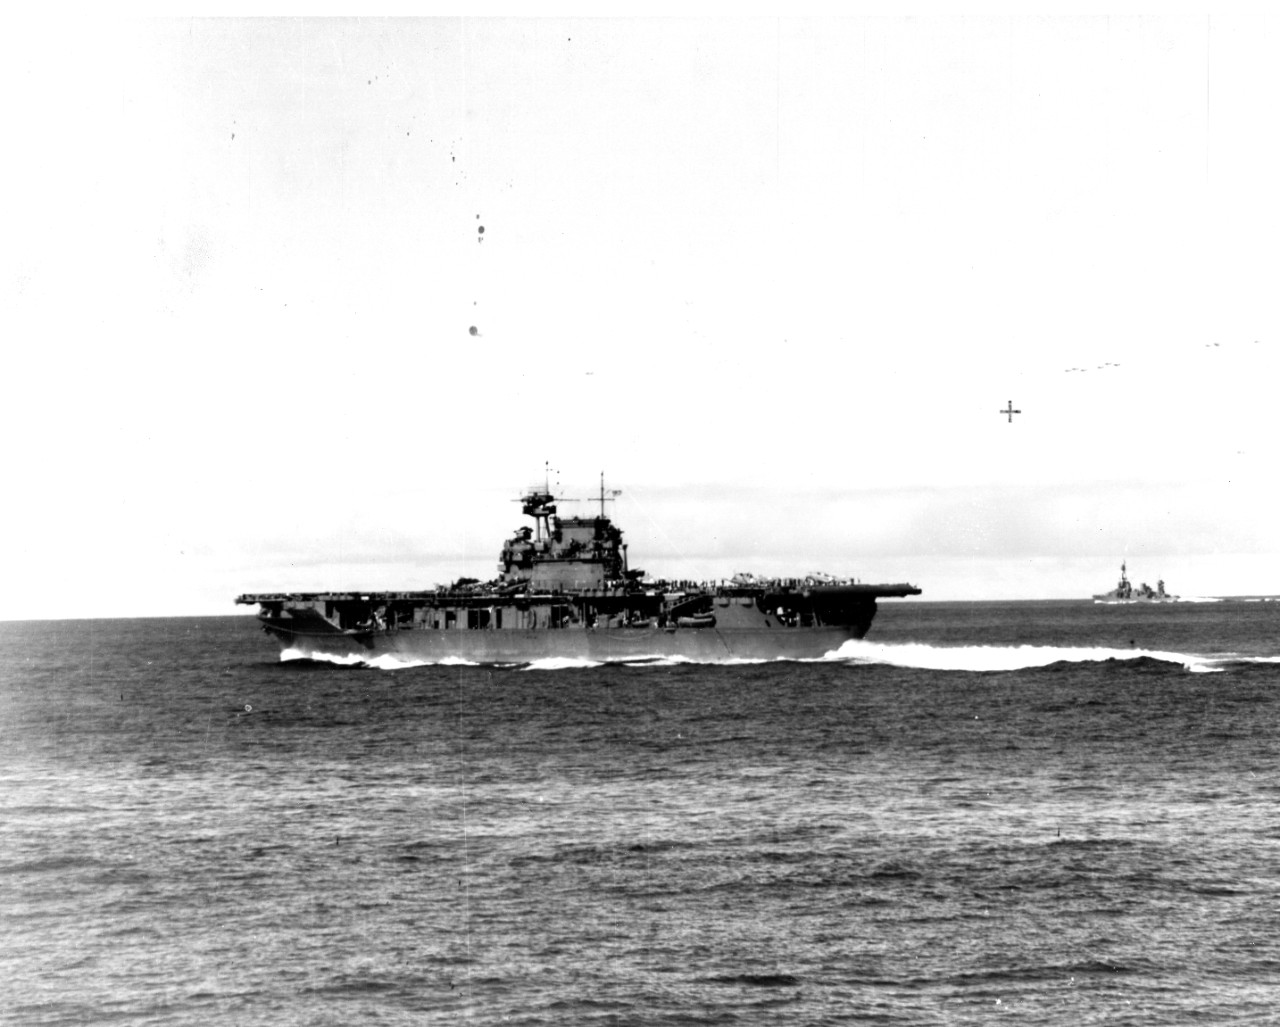 A sailor on board Pensacola snaps this picture of Enterprise as she steams at high speed during the Battle of Midway, at about 0725 on 4 June 1942. The carrier has just launched Dauntlesses of VB-6 and VS-6, and is striking her unlaunched bombers...